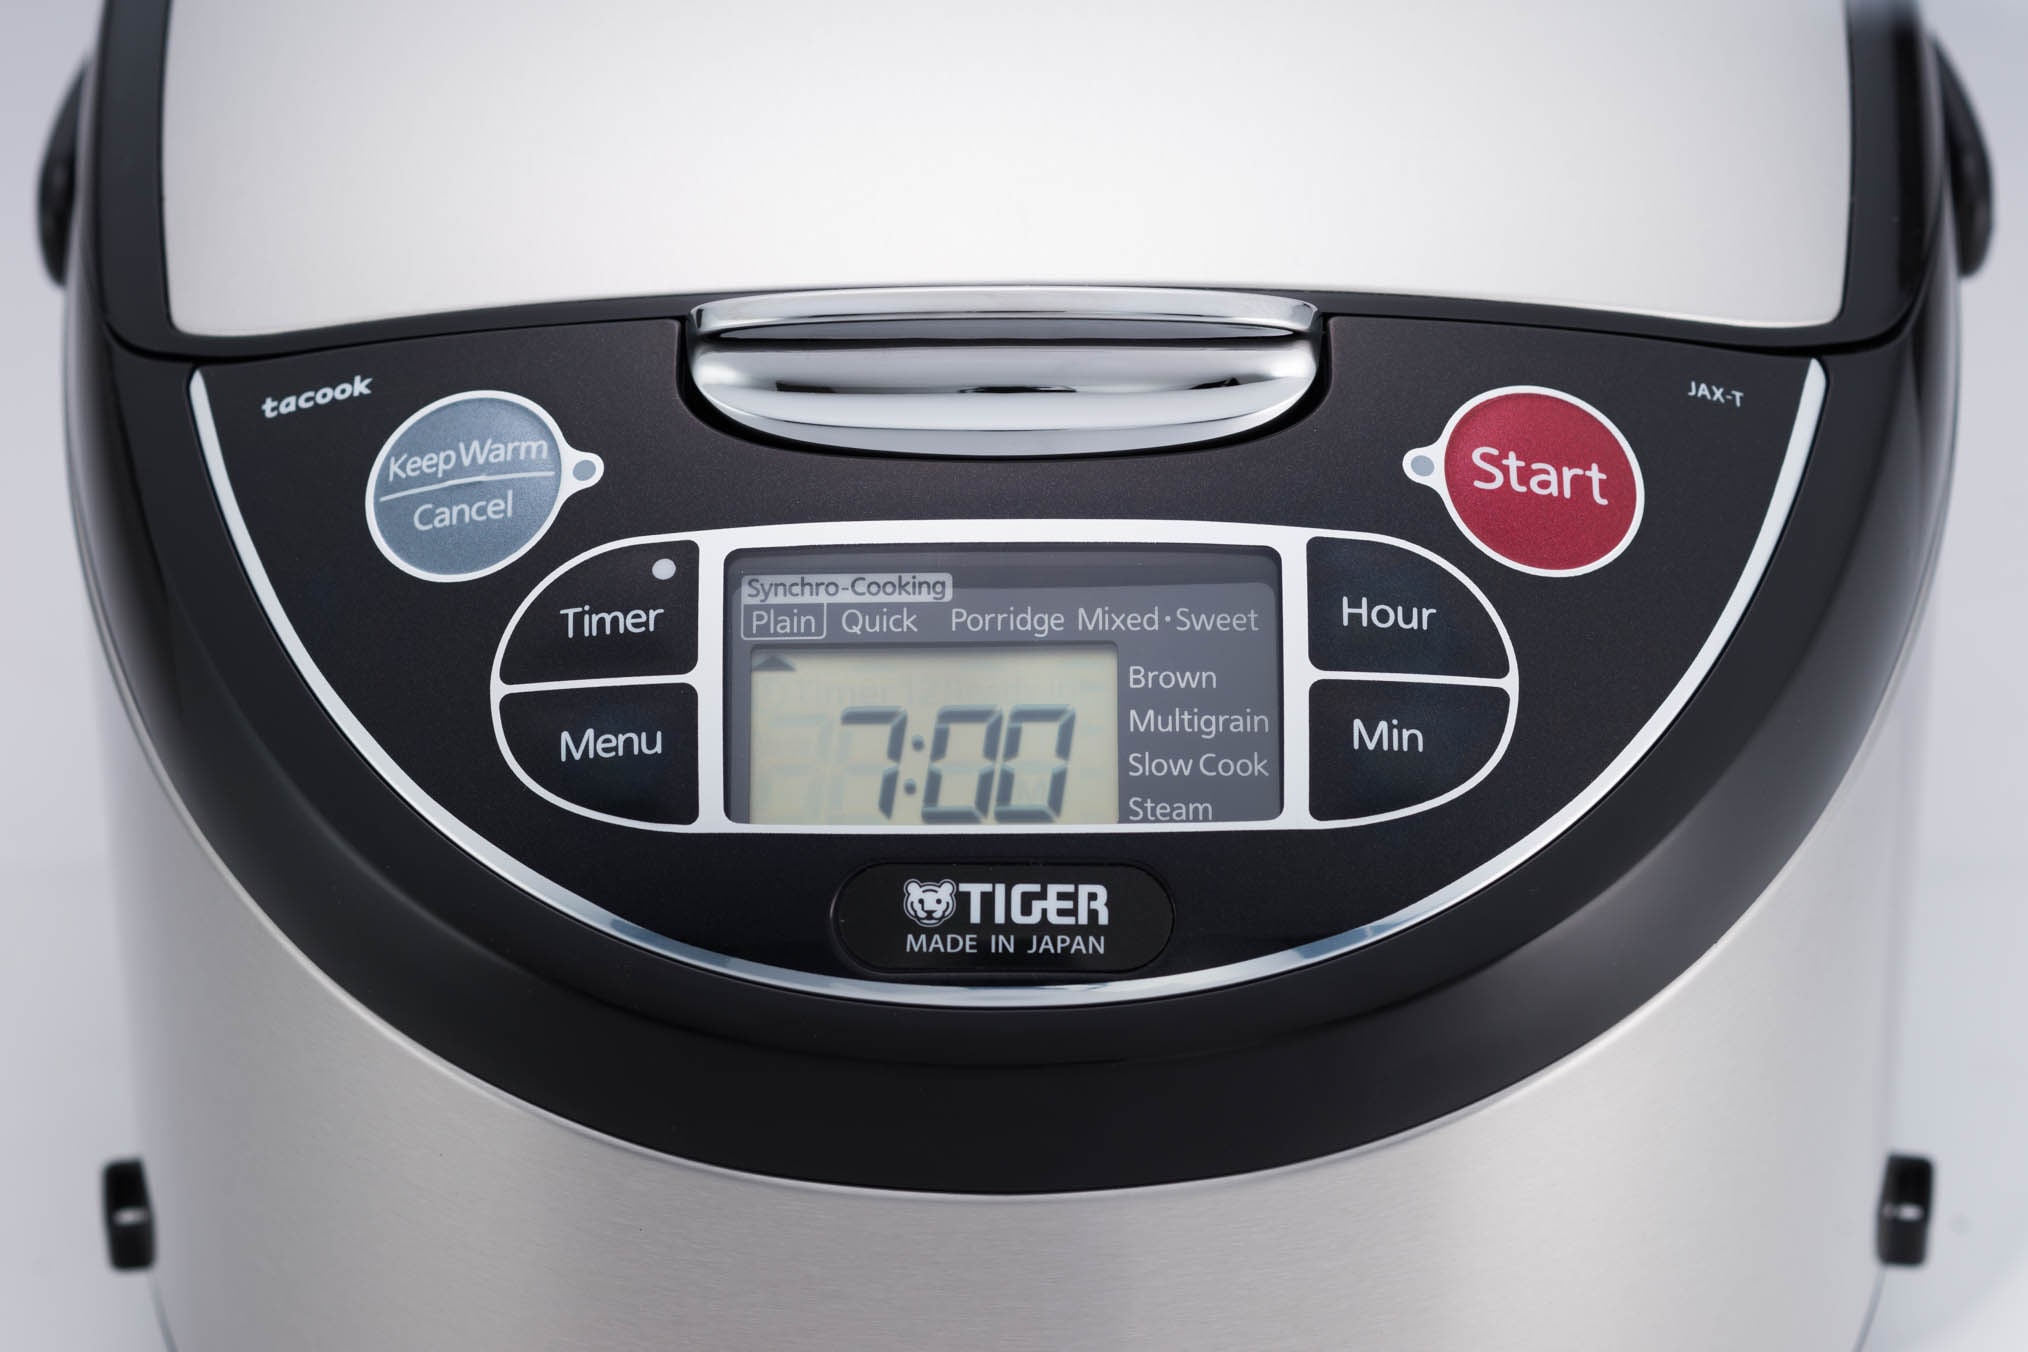 TIGER 10 CUP ELECTRIC RICE COOKER WARMER. KEEP WARM A MAXIMUM OF